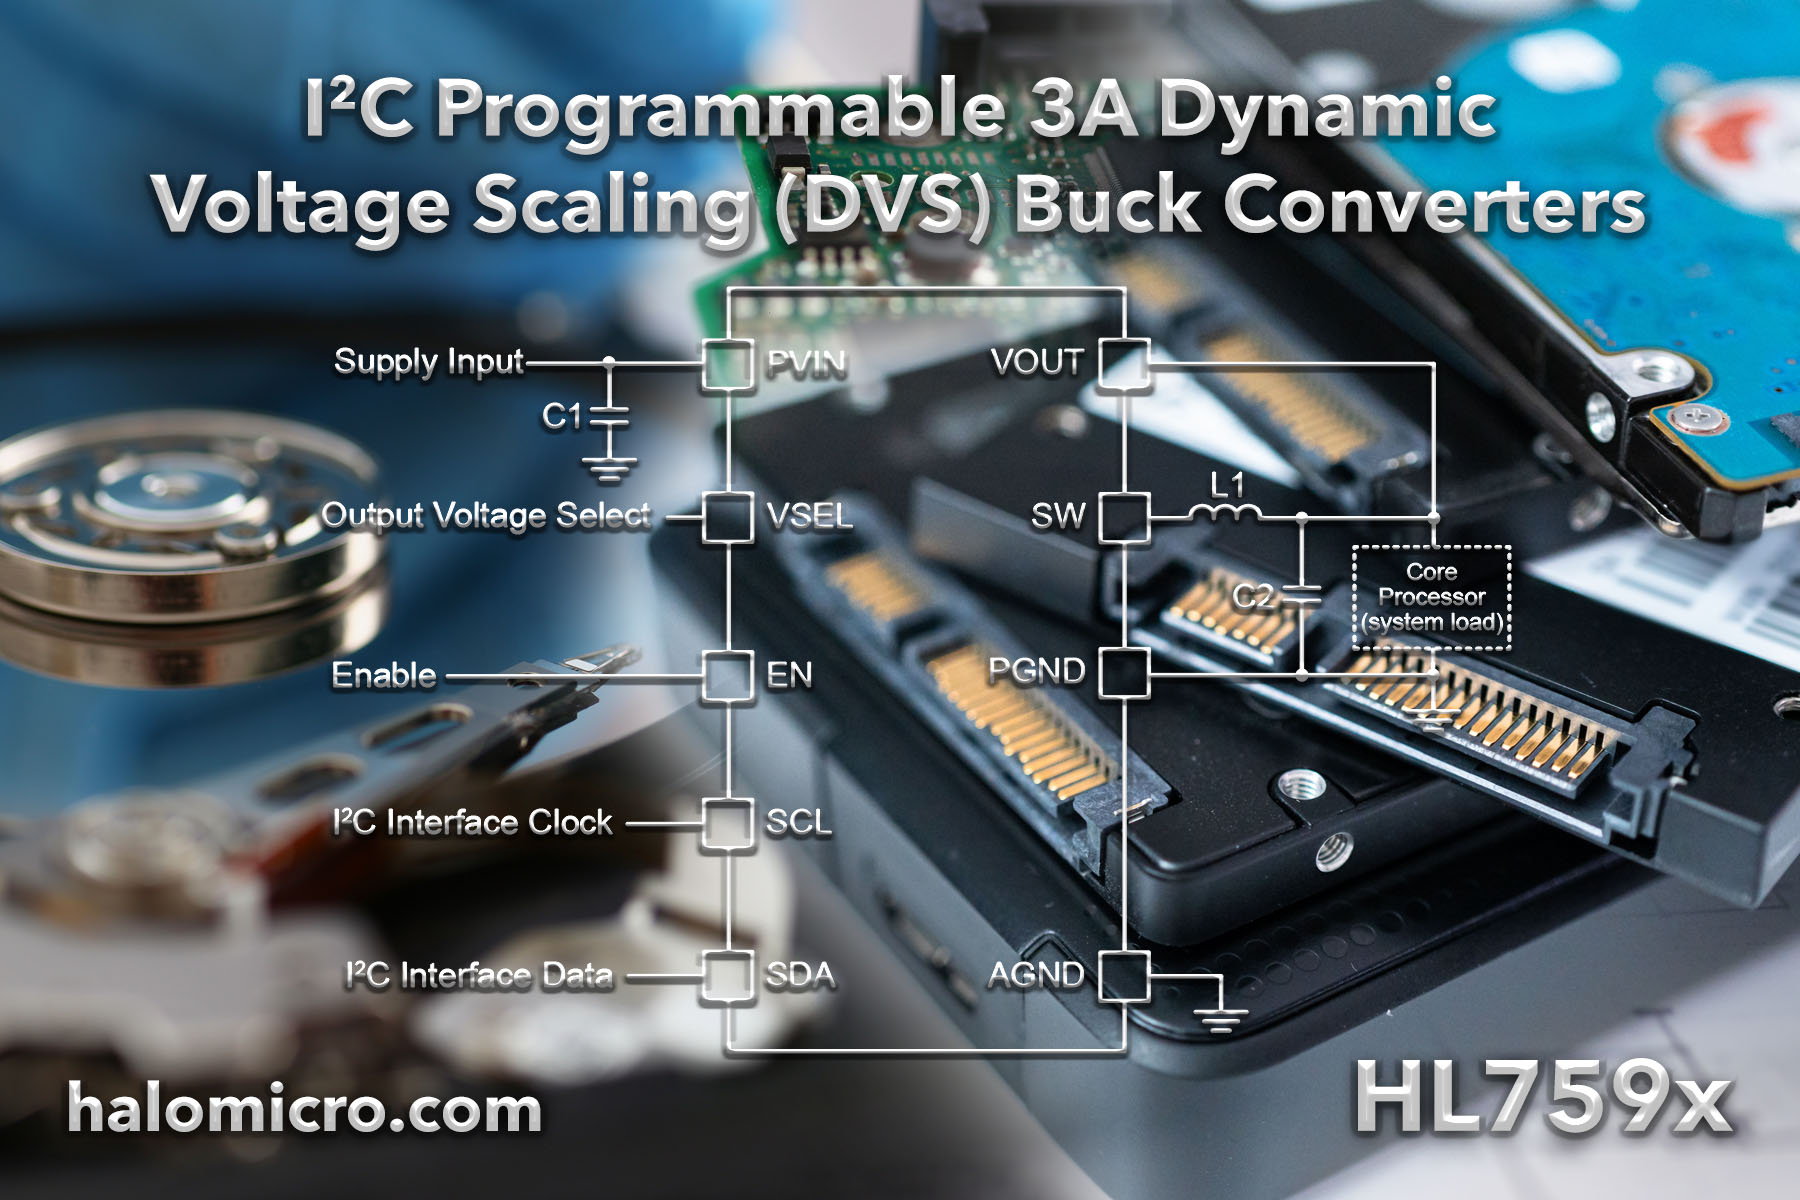 I2C Programmable 3A Dynamic Voltage Scaling Buck Converters